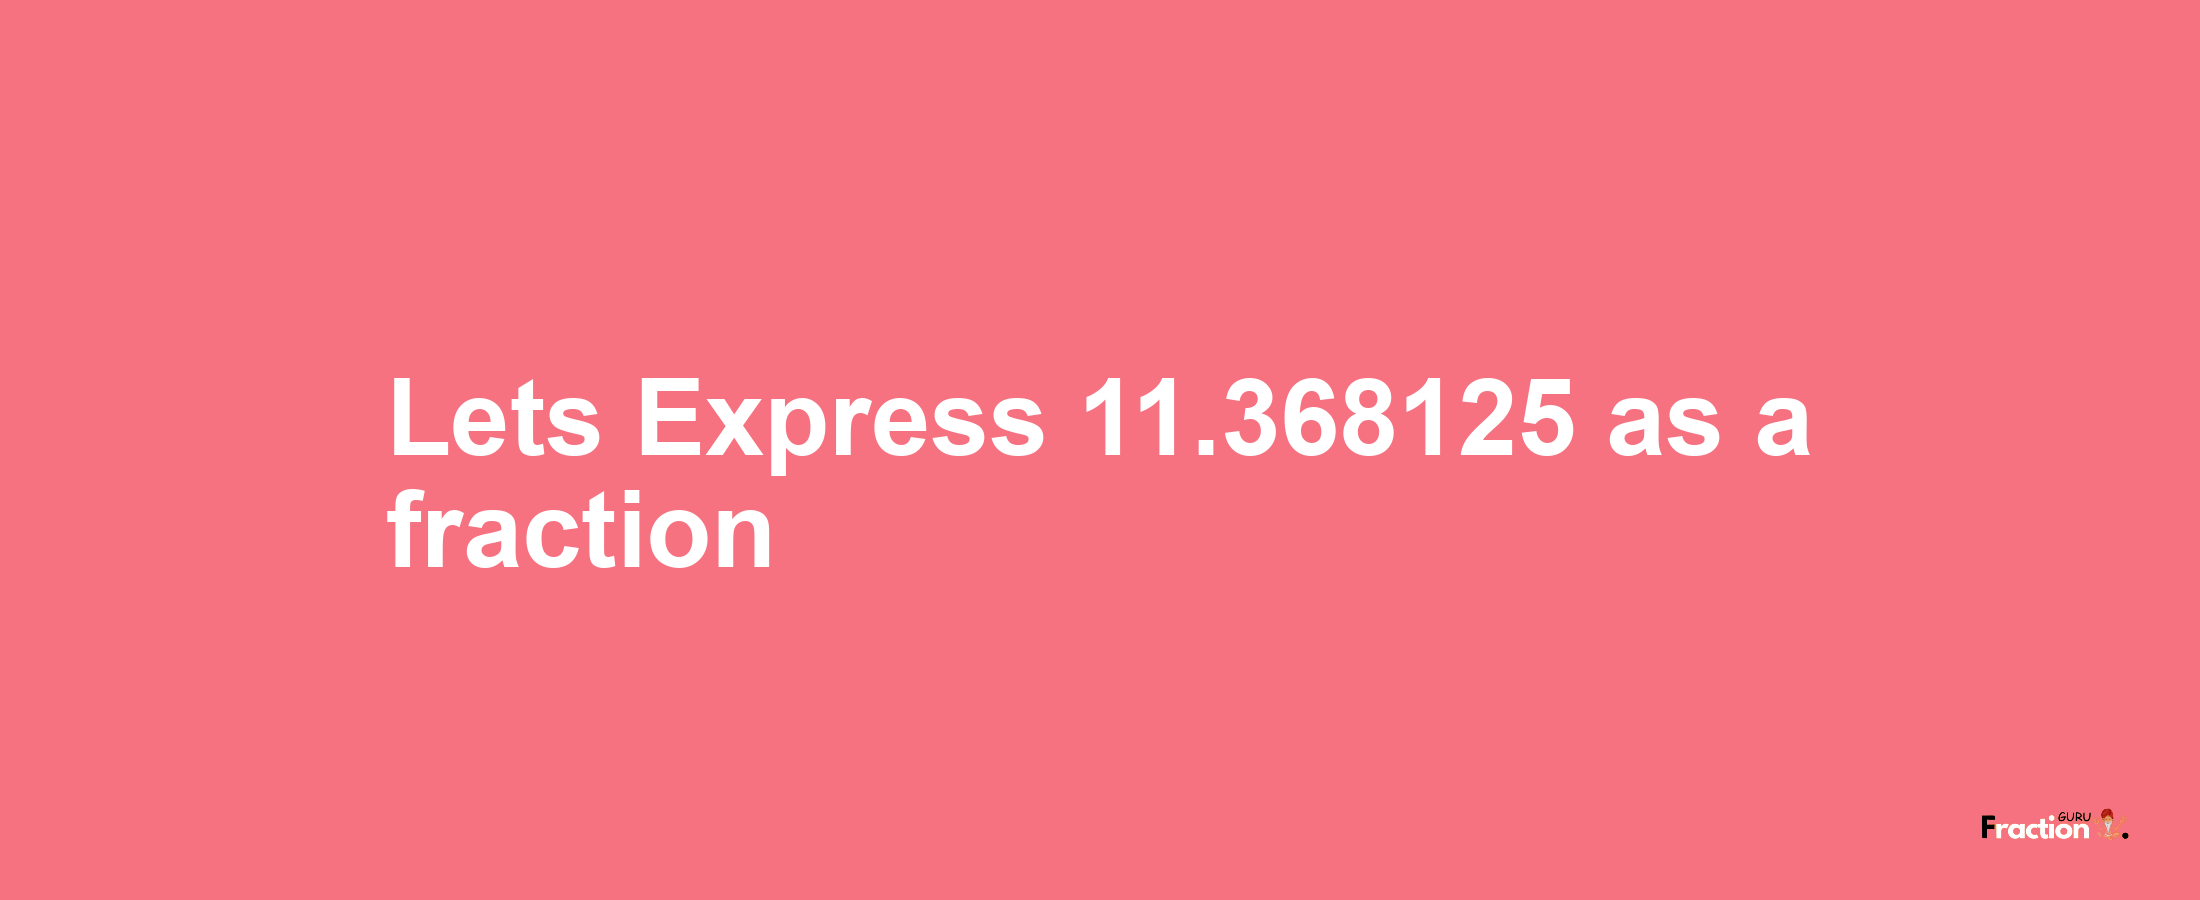 Lets Express 11.368125 as afraction